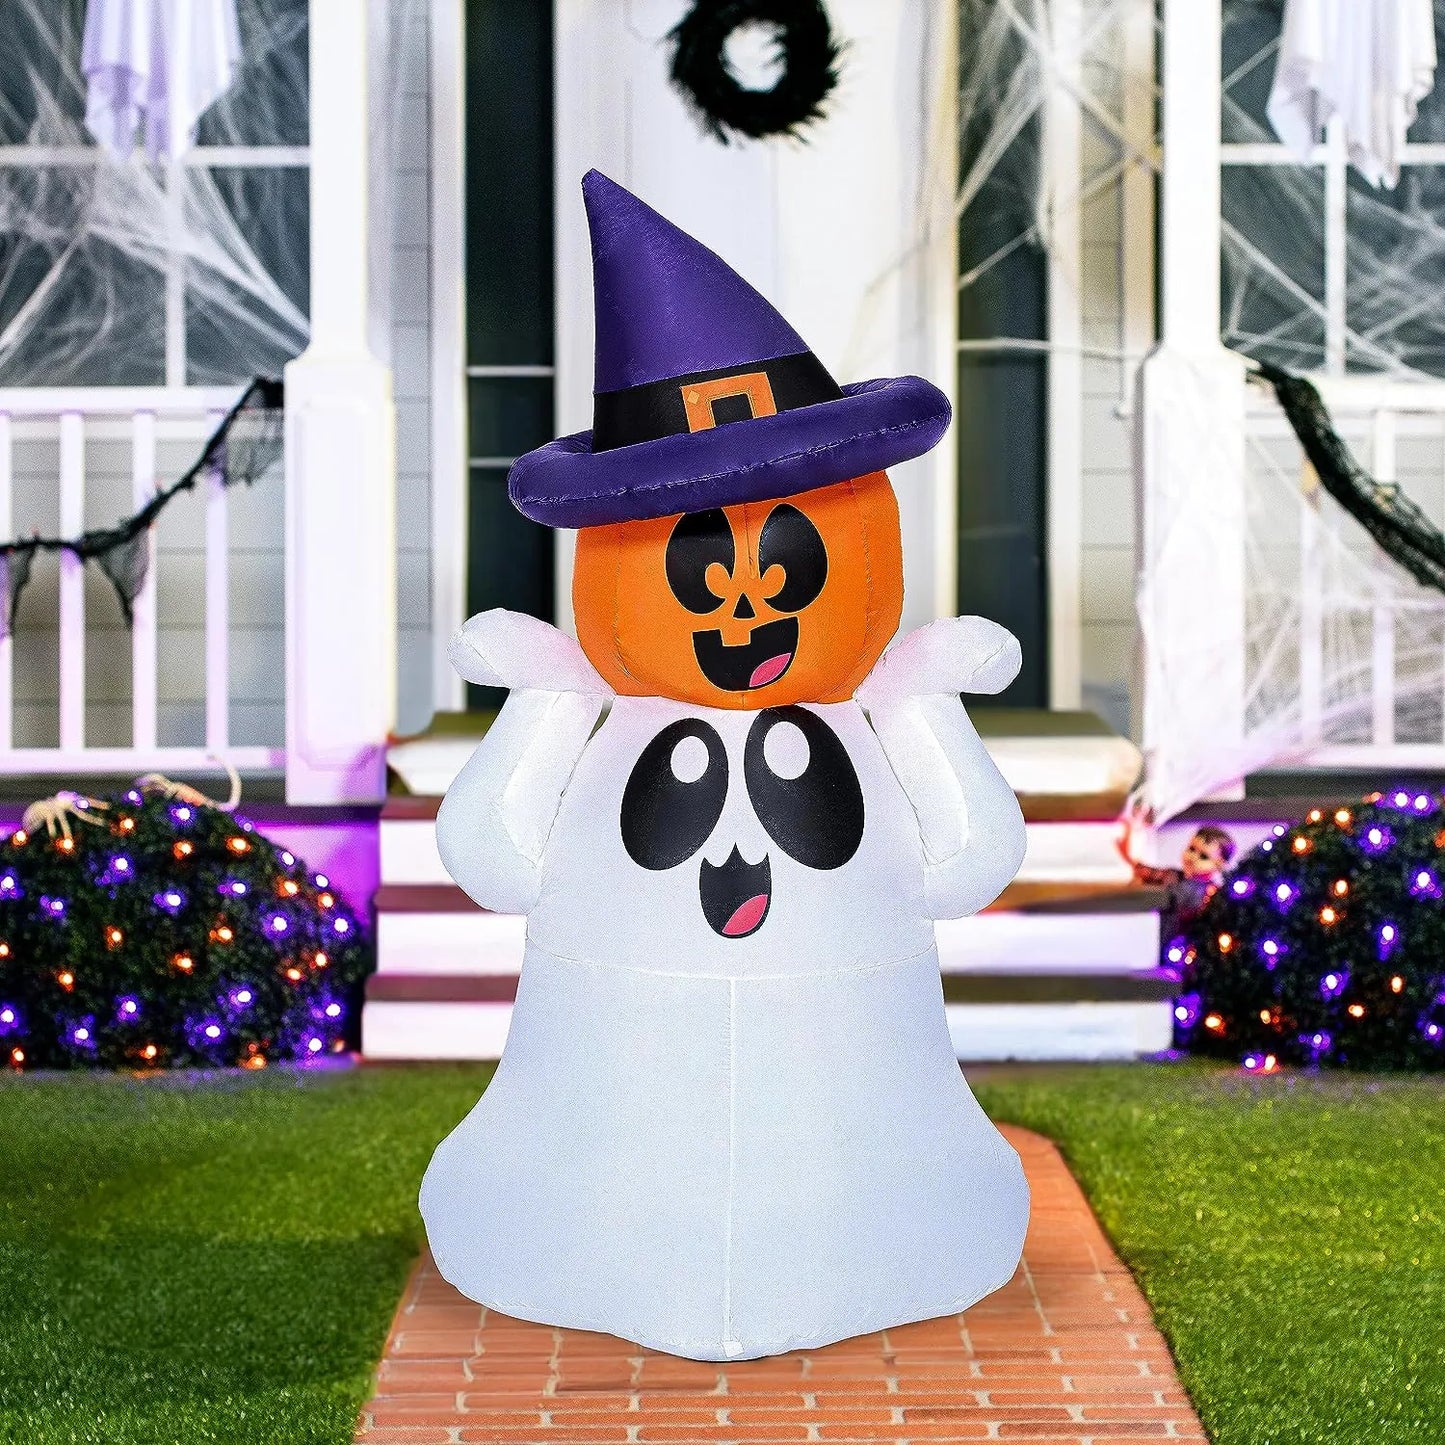 Joiedomi 5 FT Tall Halloween Inflatable Ghost with Pumpkin Head and Build-in Colorful LEDs